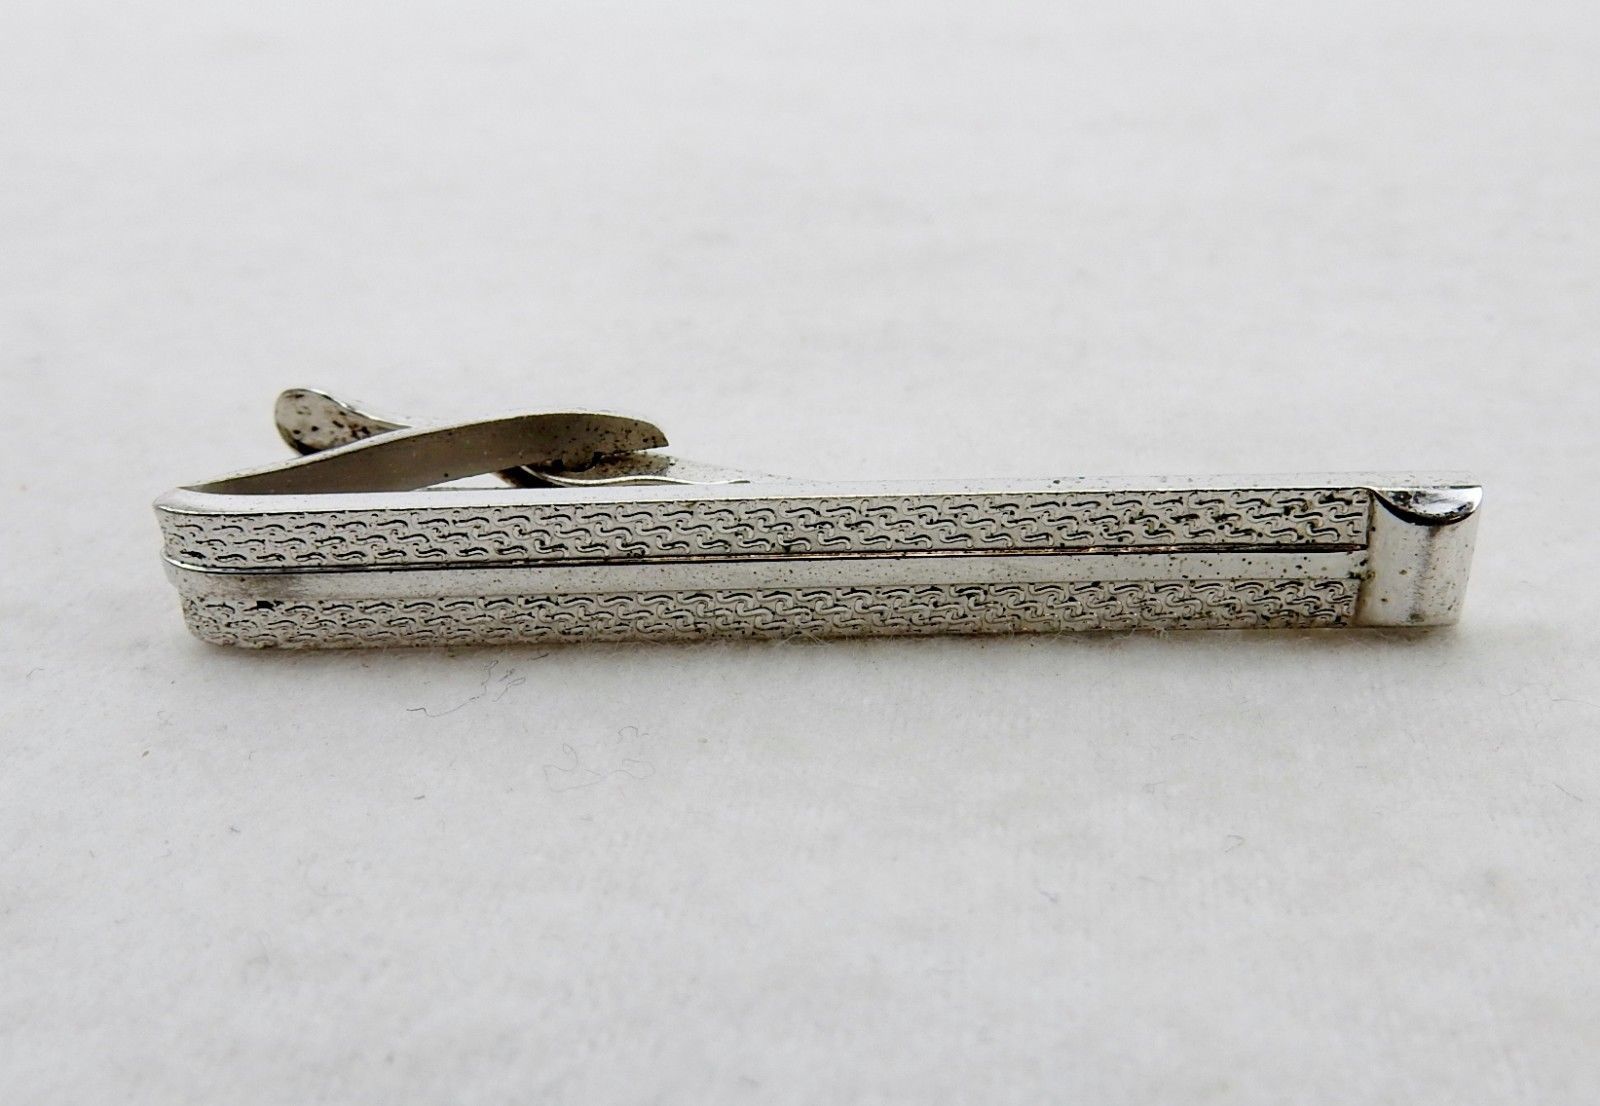 Silver Tone Tie Bar Vintage with Swigles Pattern Etched in the Bar Hickok USA - $9.75